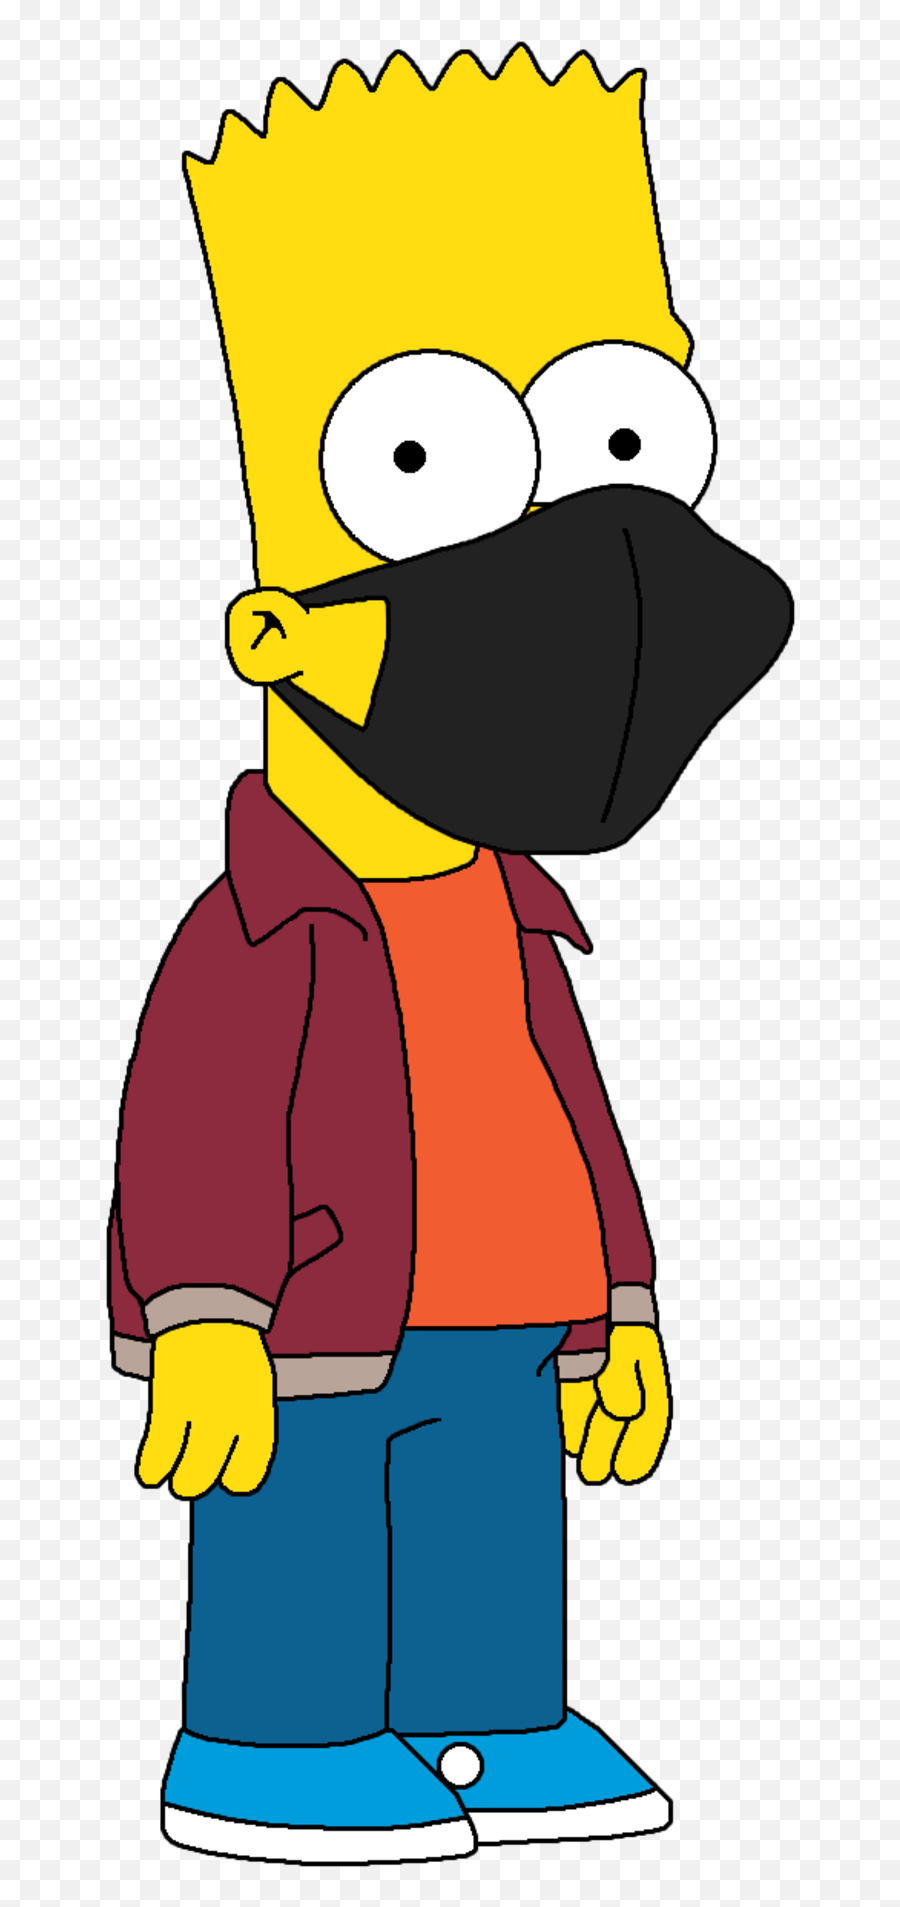 Bart Simpson Wearing A Black Face Mask - Simpsons Mask Emoji,Two Emotions As An Artist Bart Simpson